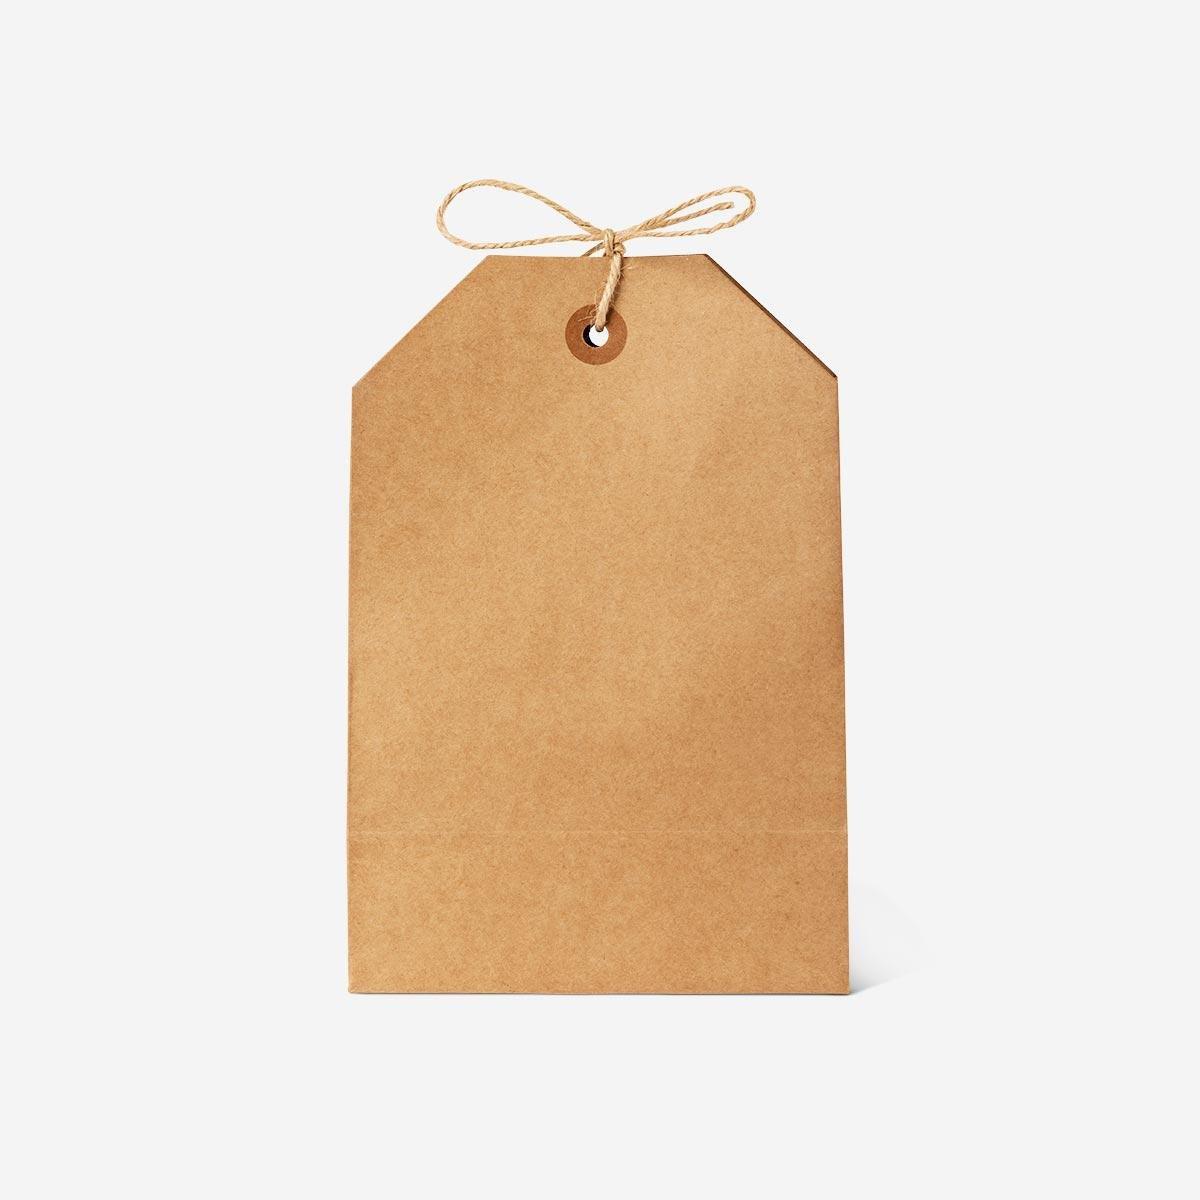 Brown gift bags